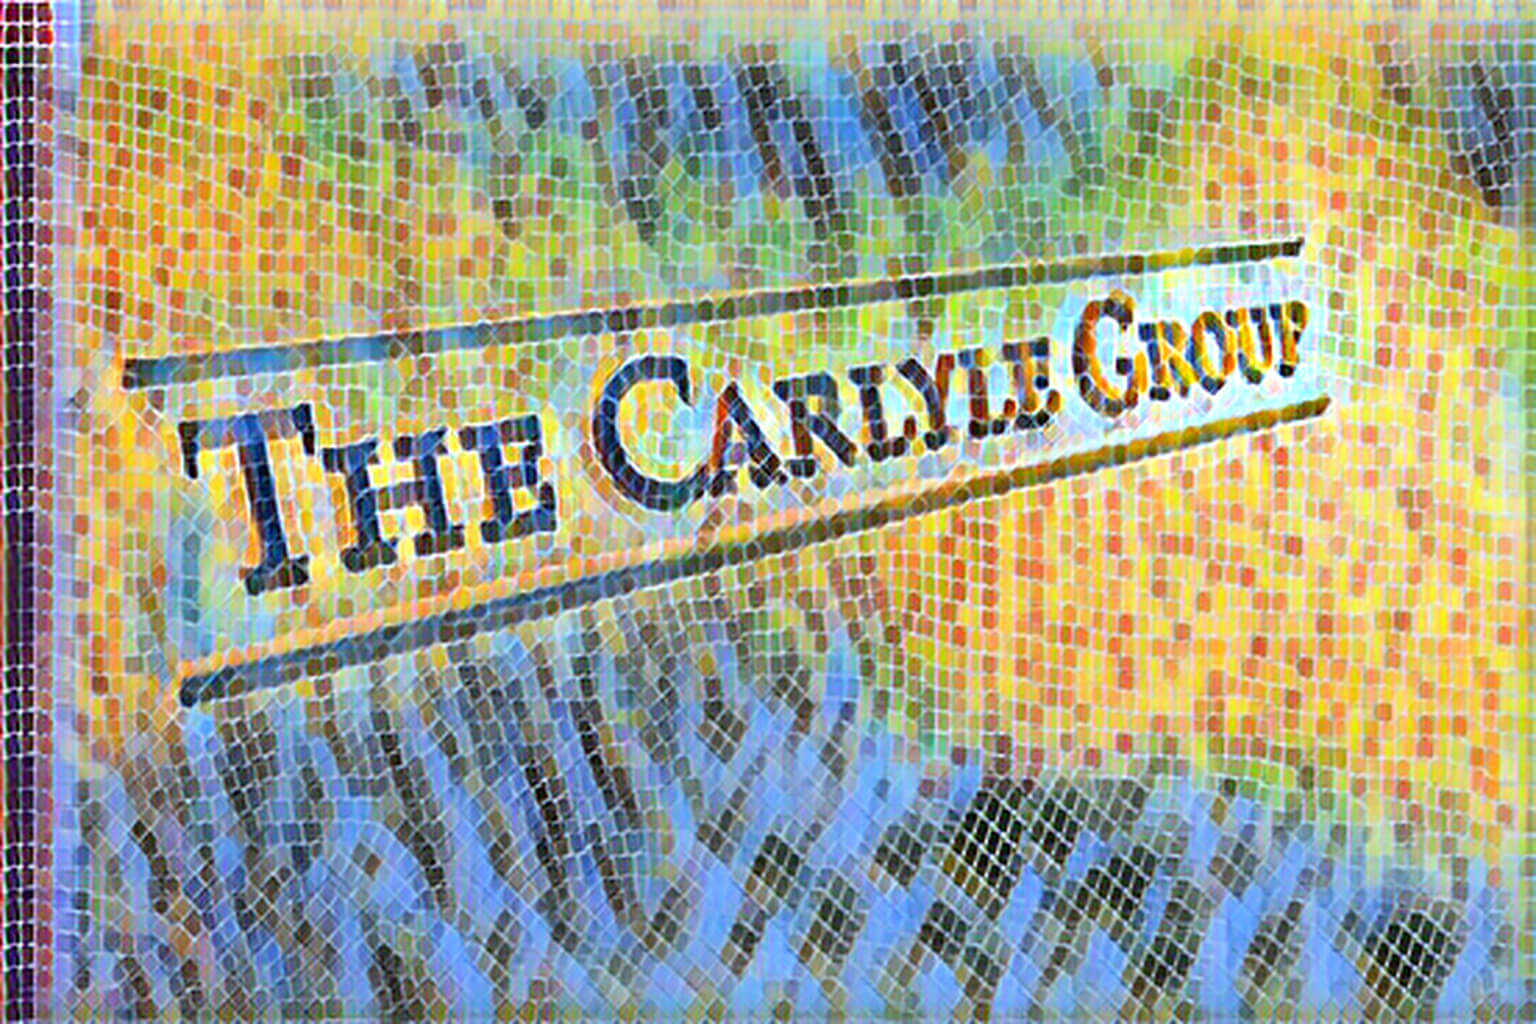   carlyle   group    